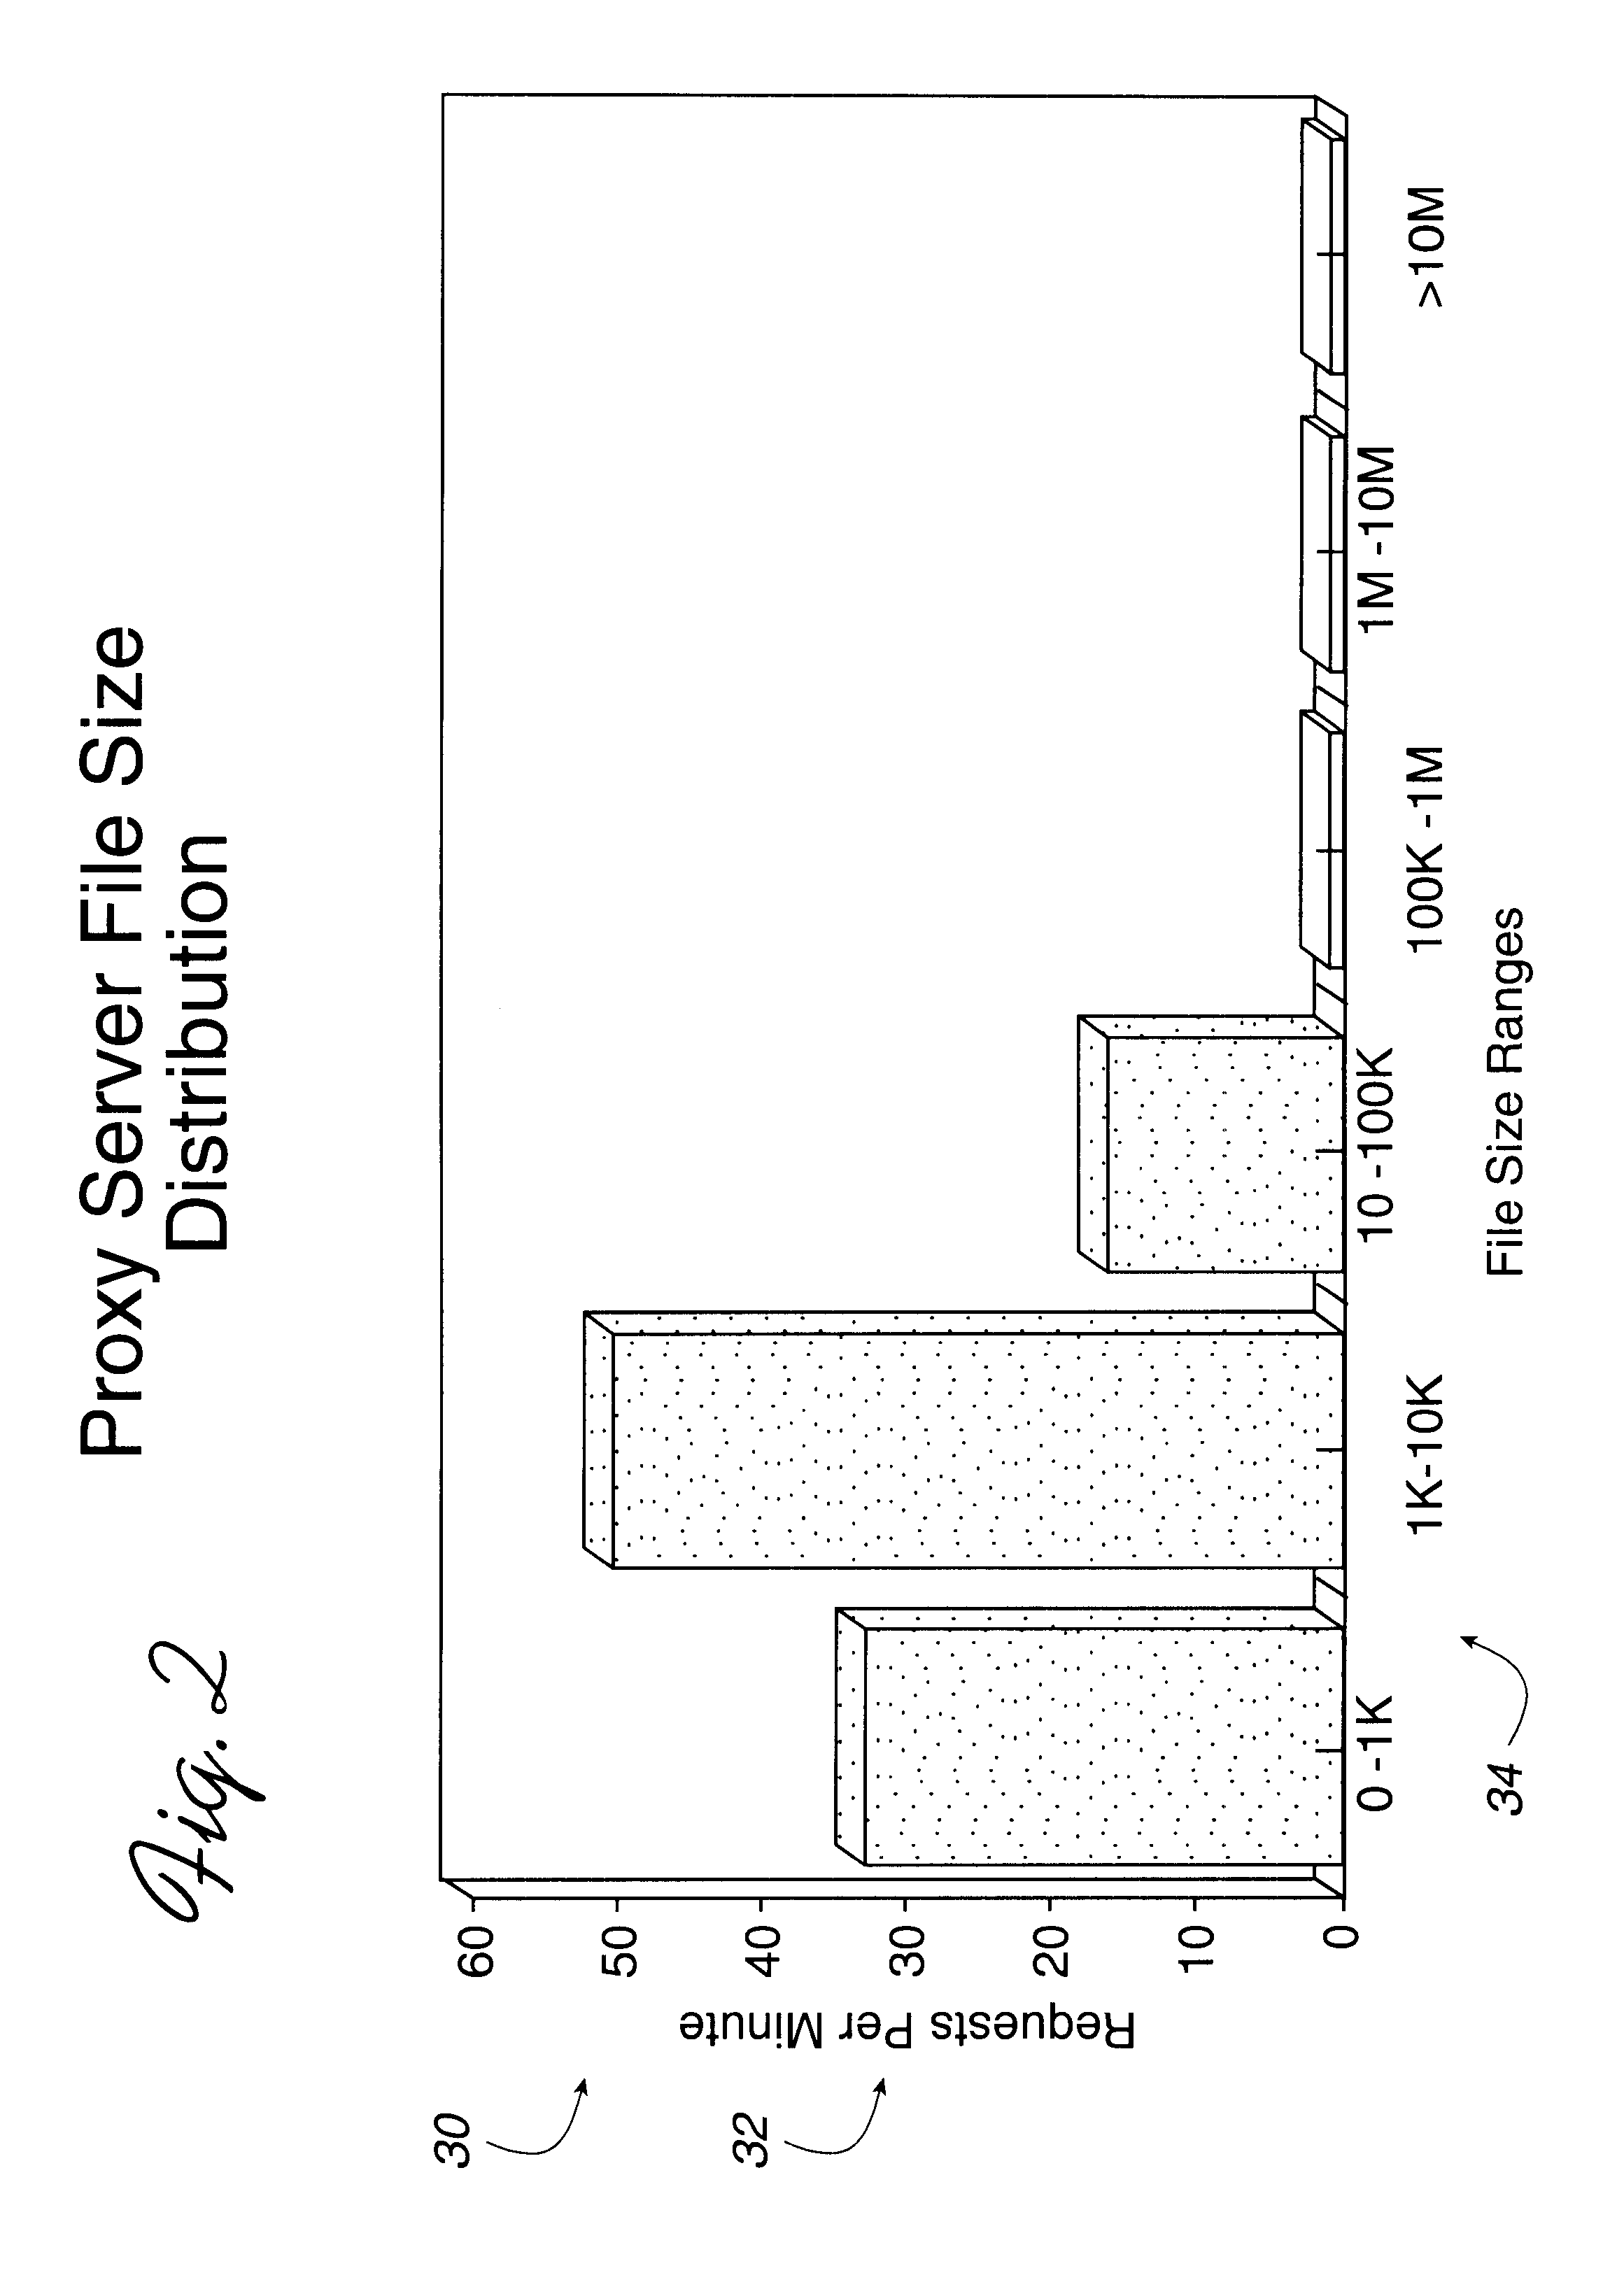 System, method, and program for accessing secondary storage in a network system